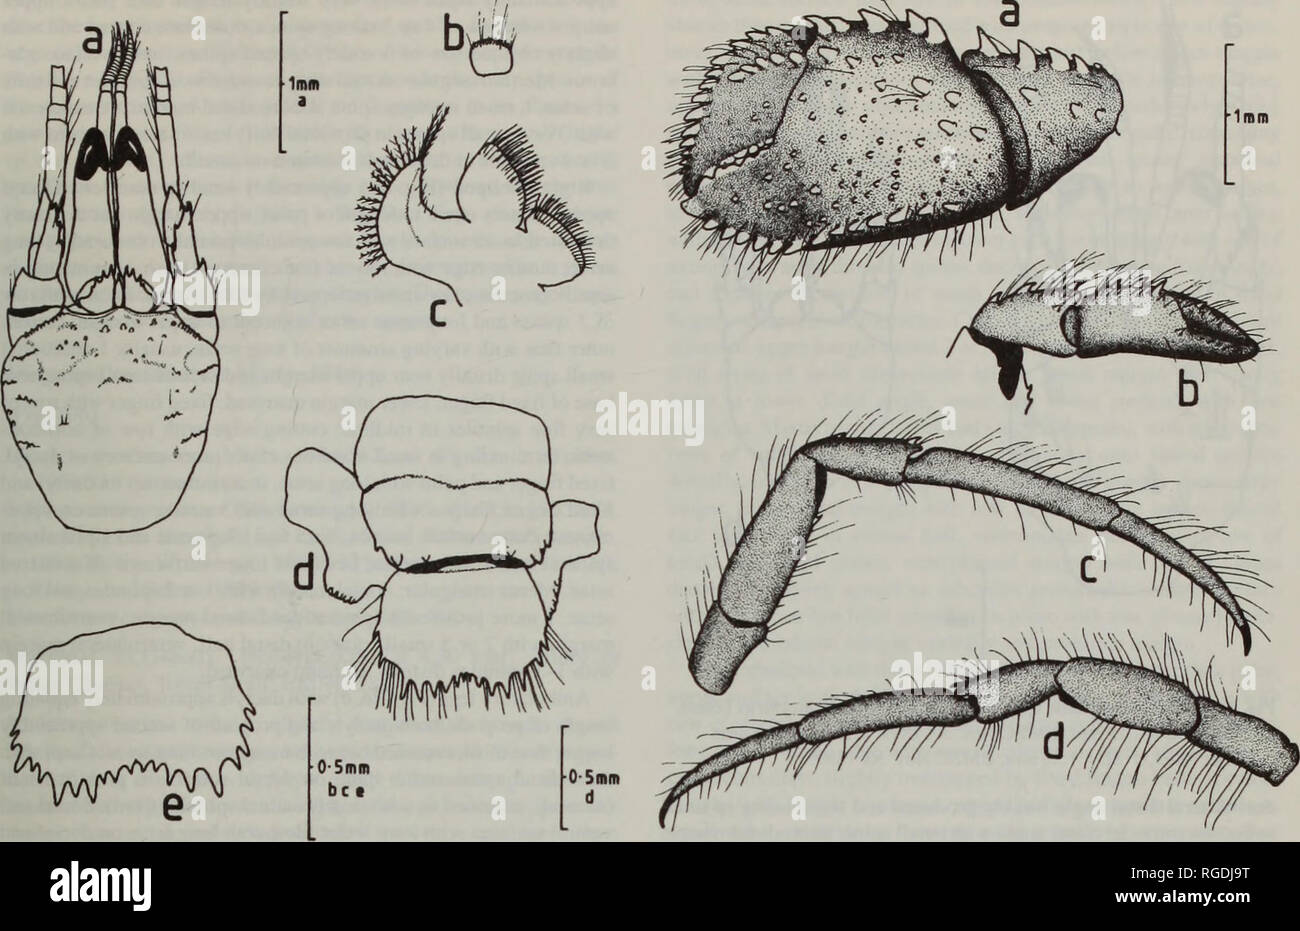 . Bulletin of the Natural History Museum Zoology. DIOGENES OF SINGAPORE AND THE MALAY PENINSULA 35. Fig. 1 Diogenes inglei sp. nov., holotype ovigerous 9 SL = 1.46 mm. BMNH 1905.10.21.33; a. shield and cephalic appendages; b. anterior lobe of sternite of 3rd pereopods; c. I st maxilliped; d. 6th abdominal tergite, protopods of uropods and telson; e. telson. weakly spinulose. Dorsal margins of branchiostegites with 3-6 small spines or spinules. Ocular peduncles swollen proximally and narrowing distally to tapering corneae; overreached by antennular peduncles. Ocular acicles with 1-3 strong and  Stock Photo